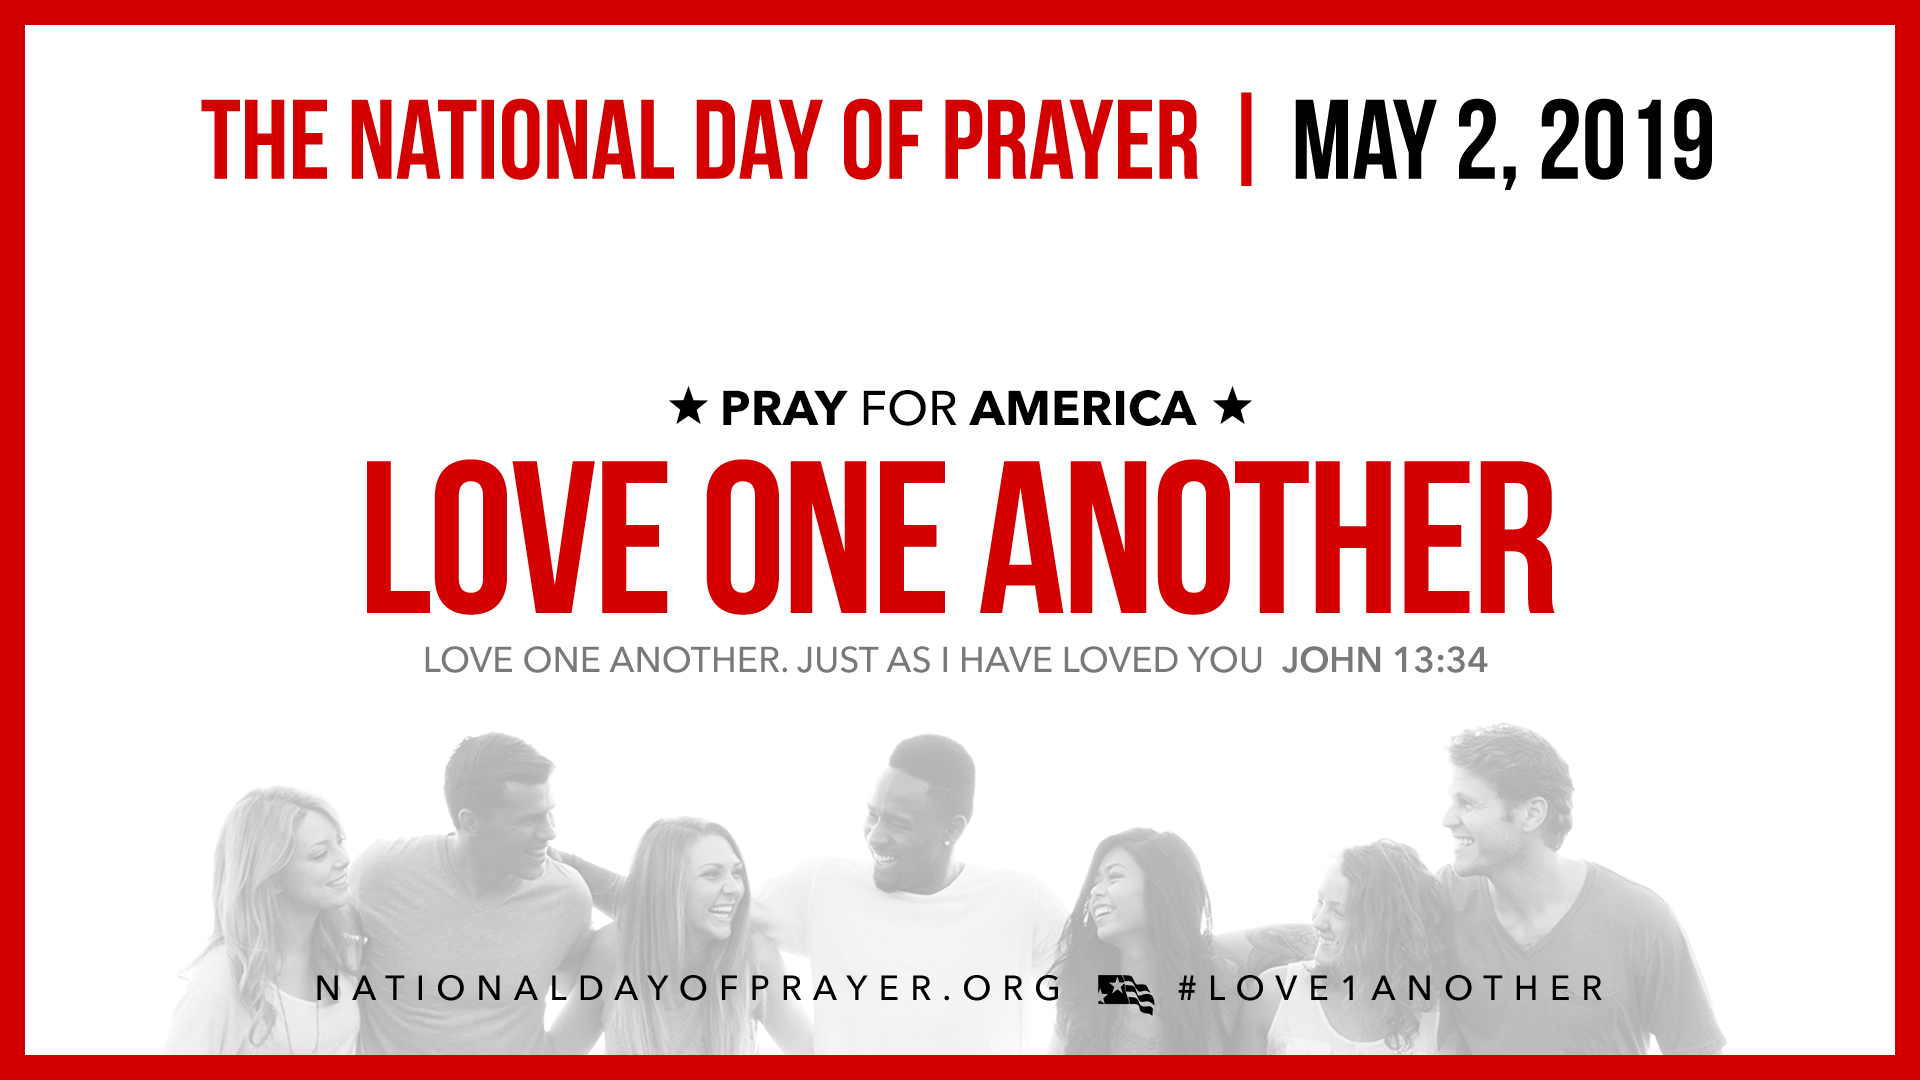 National Day of Prayer to call Americans to â€˜Love One Another,â€™ Thursday, May 2